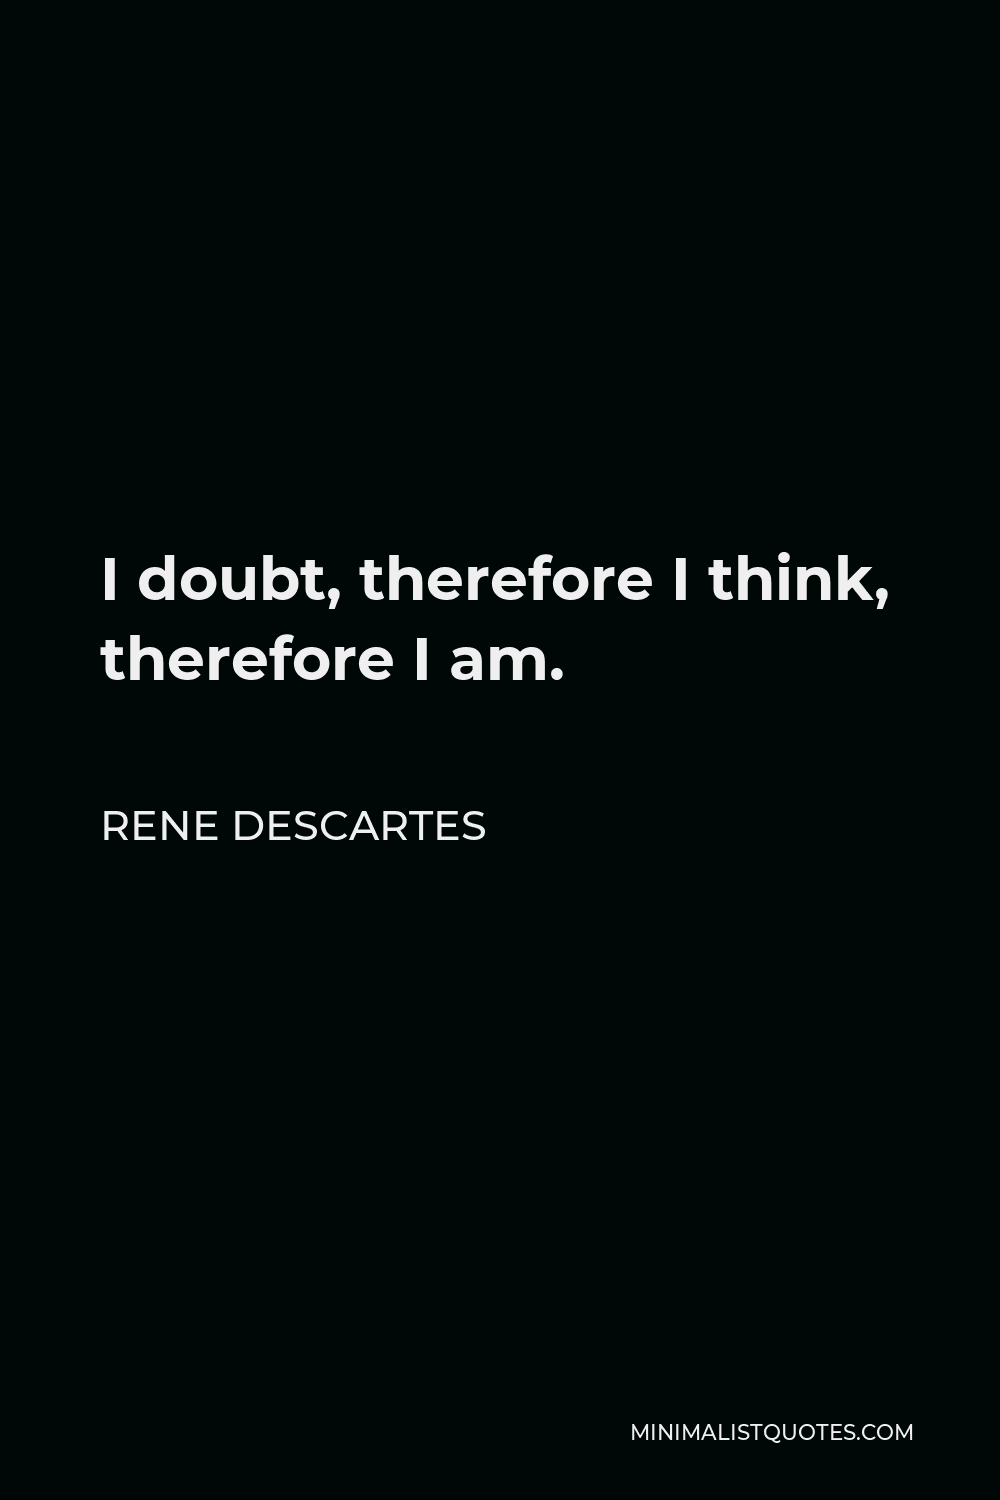 i doubt therefore i think therefore i am